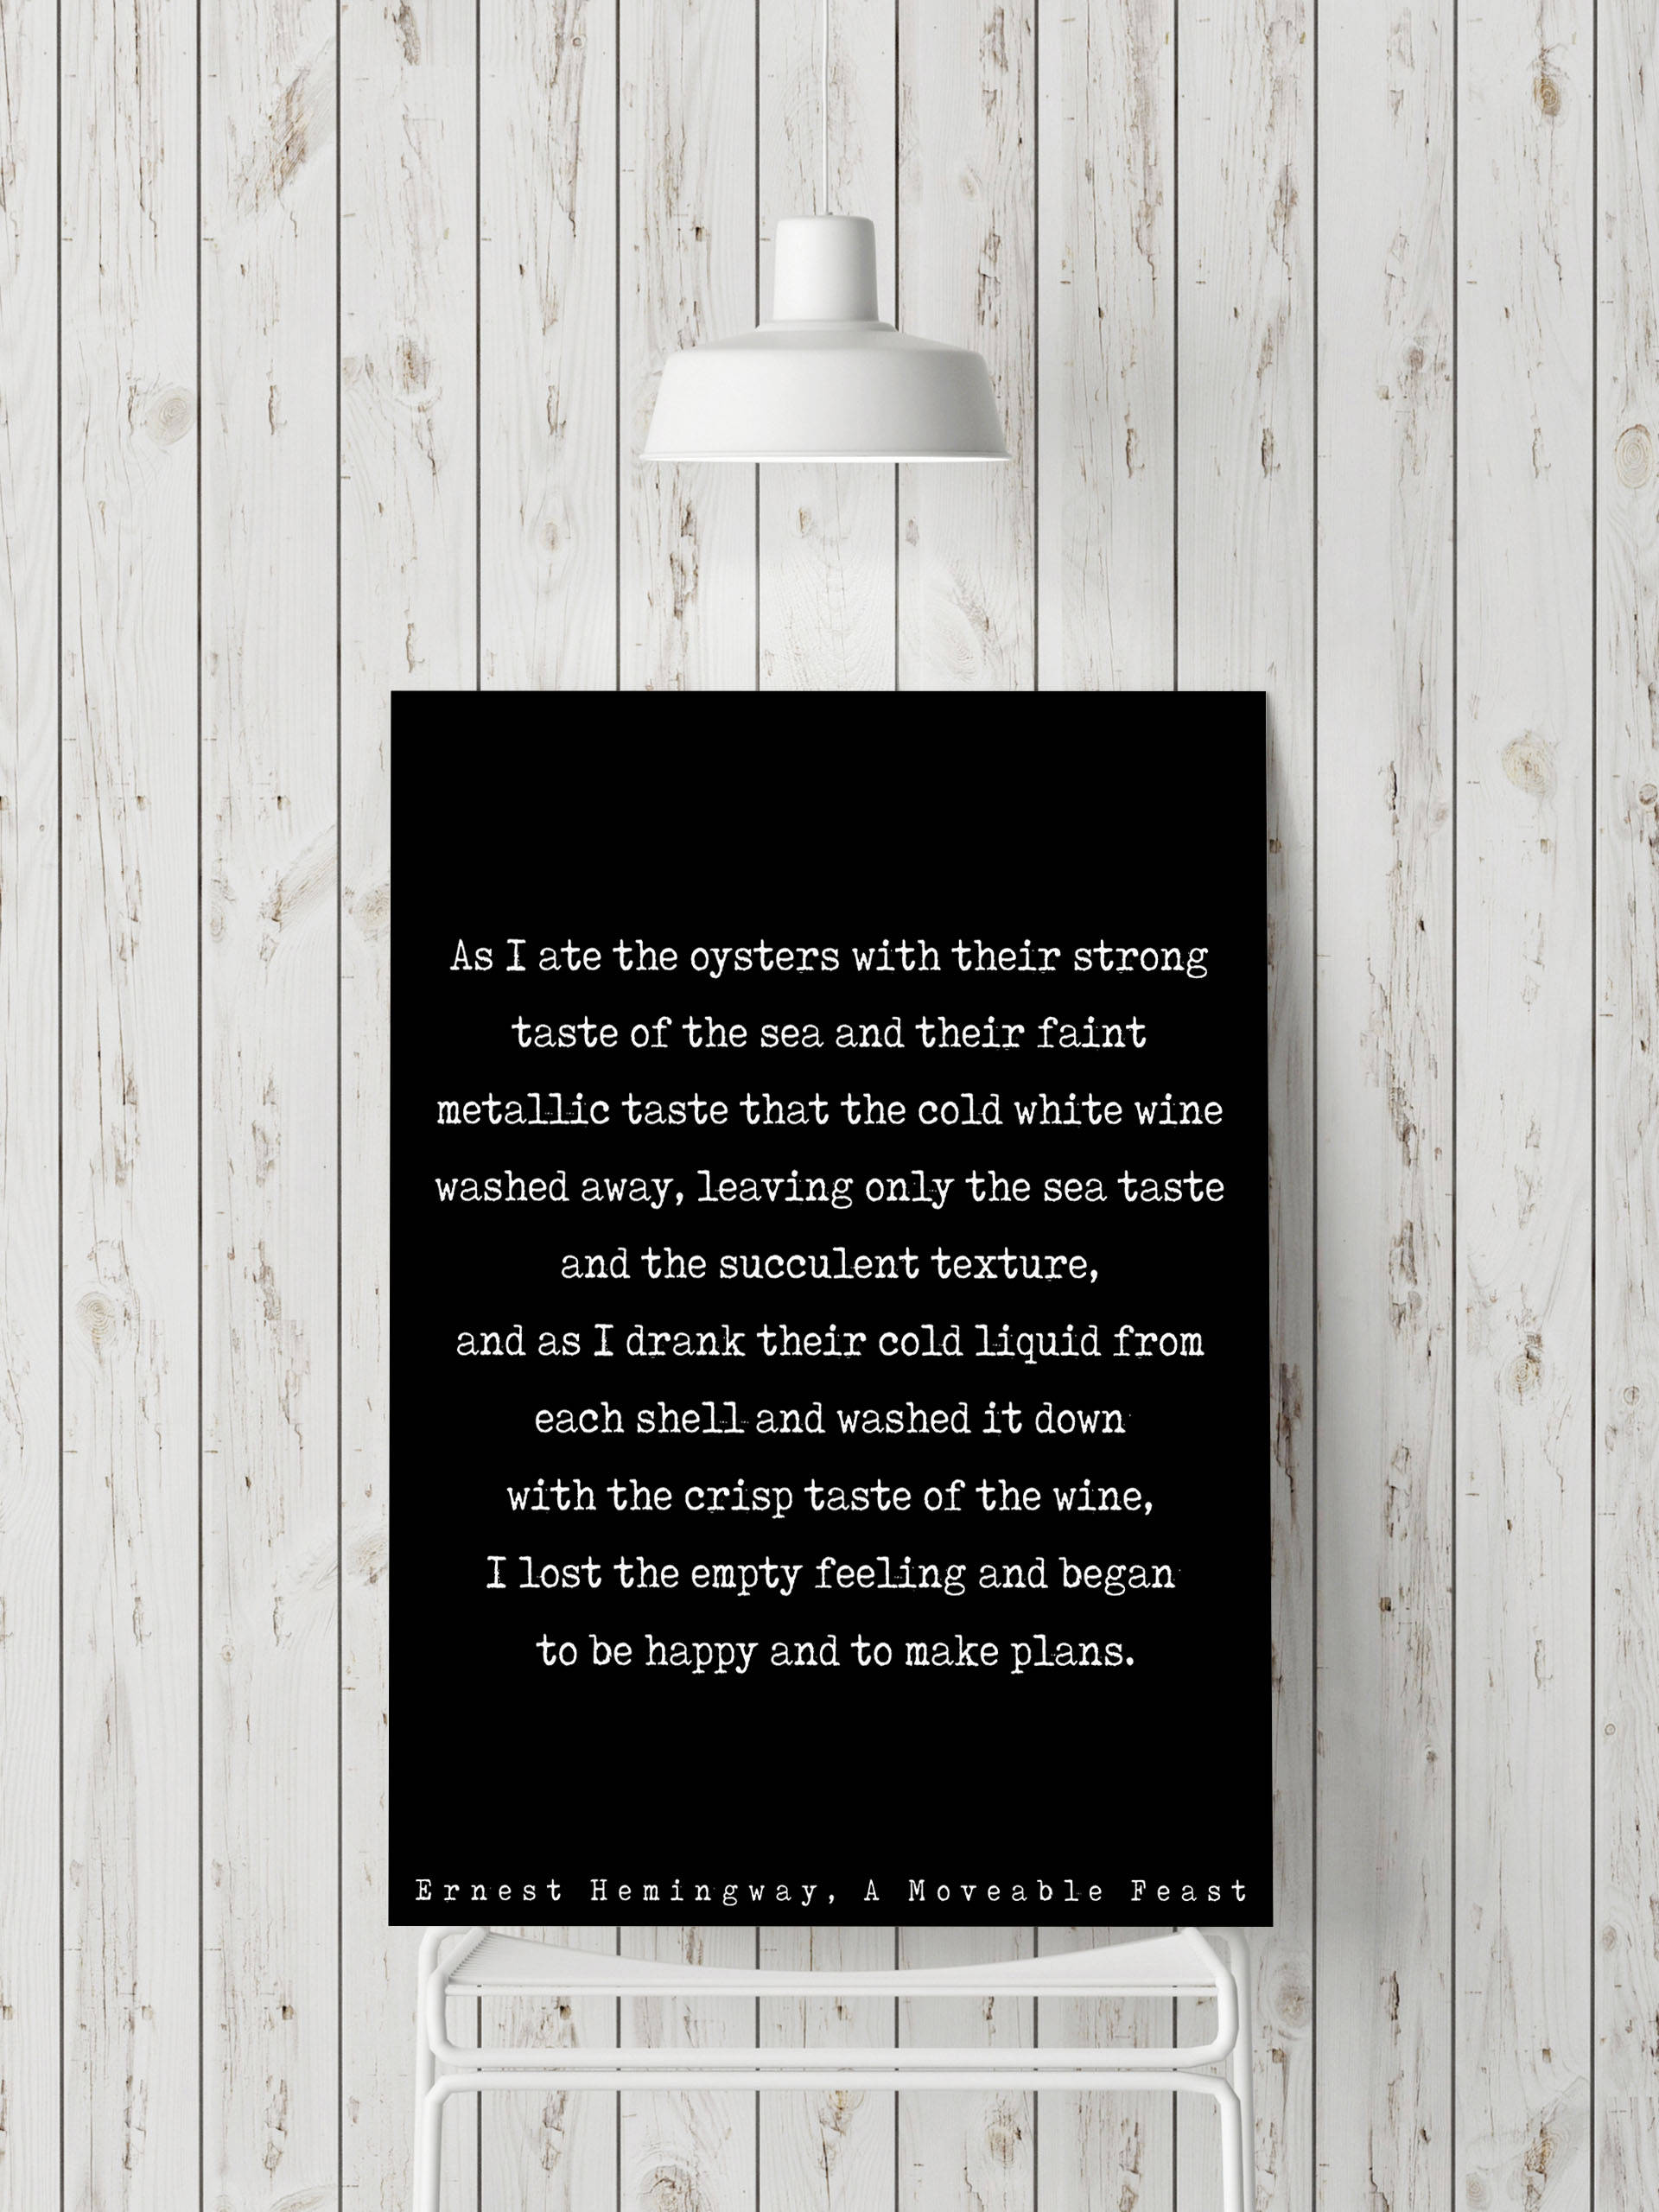 Ernest Hemingway Quote Print, Wine Quotes Poster Print in Black & White from A Moveable Feast Book